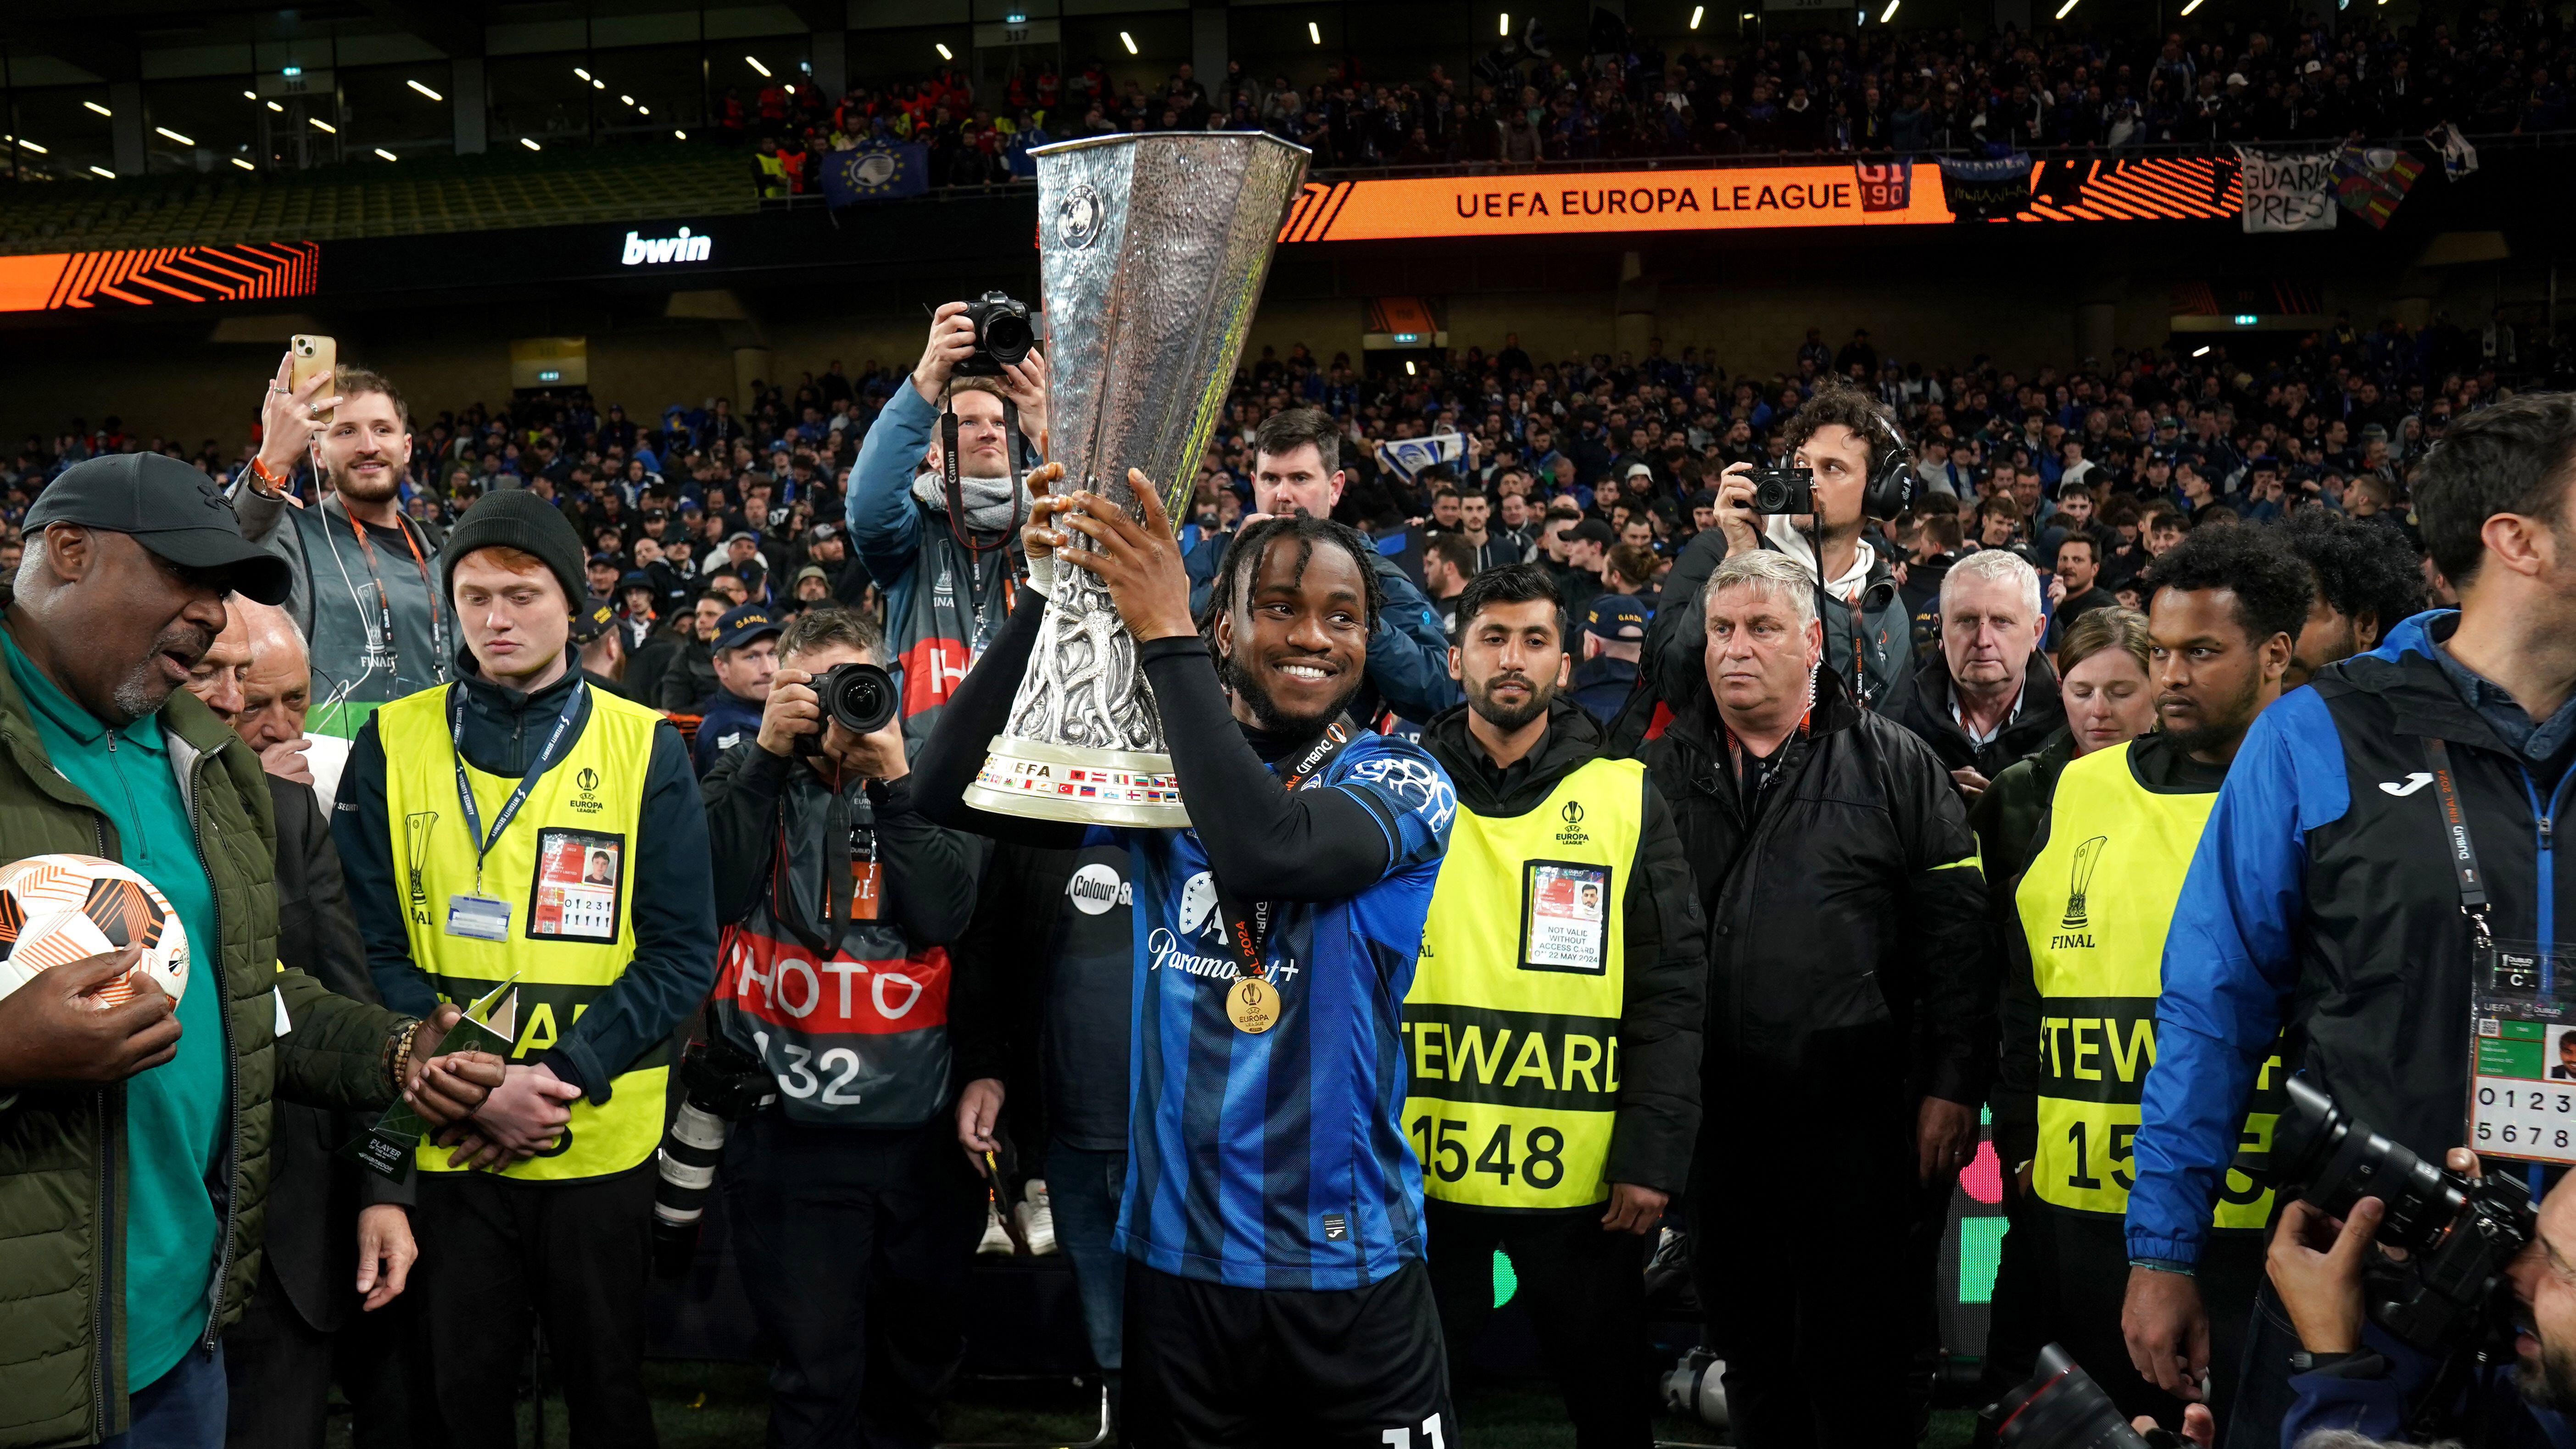 Ademola Lookman with the Europa League trophy.